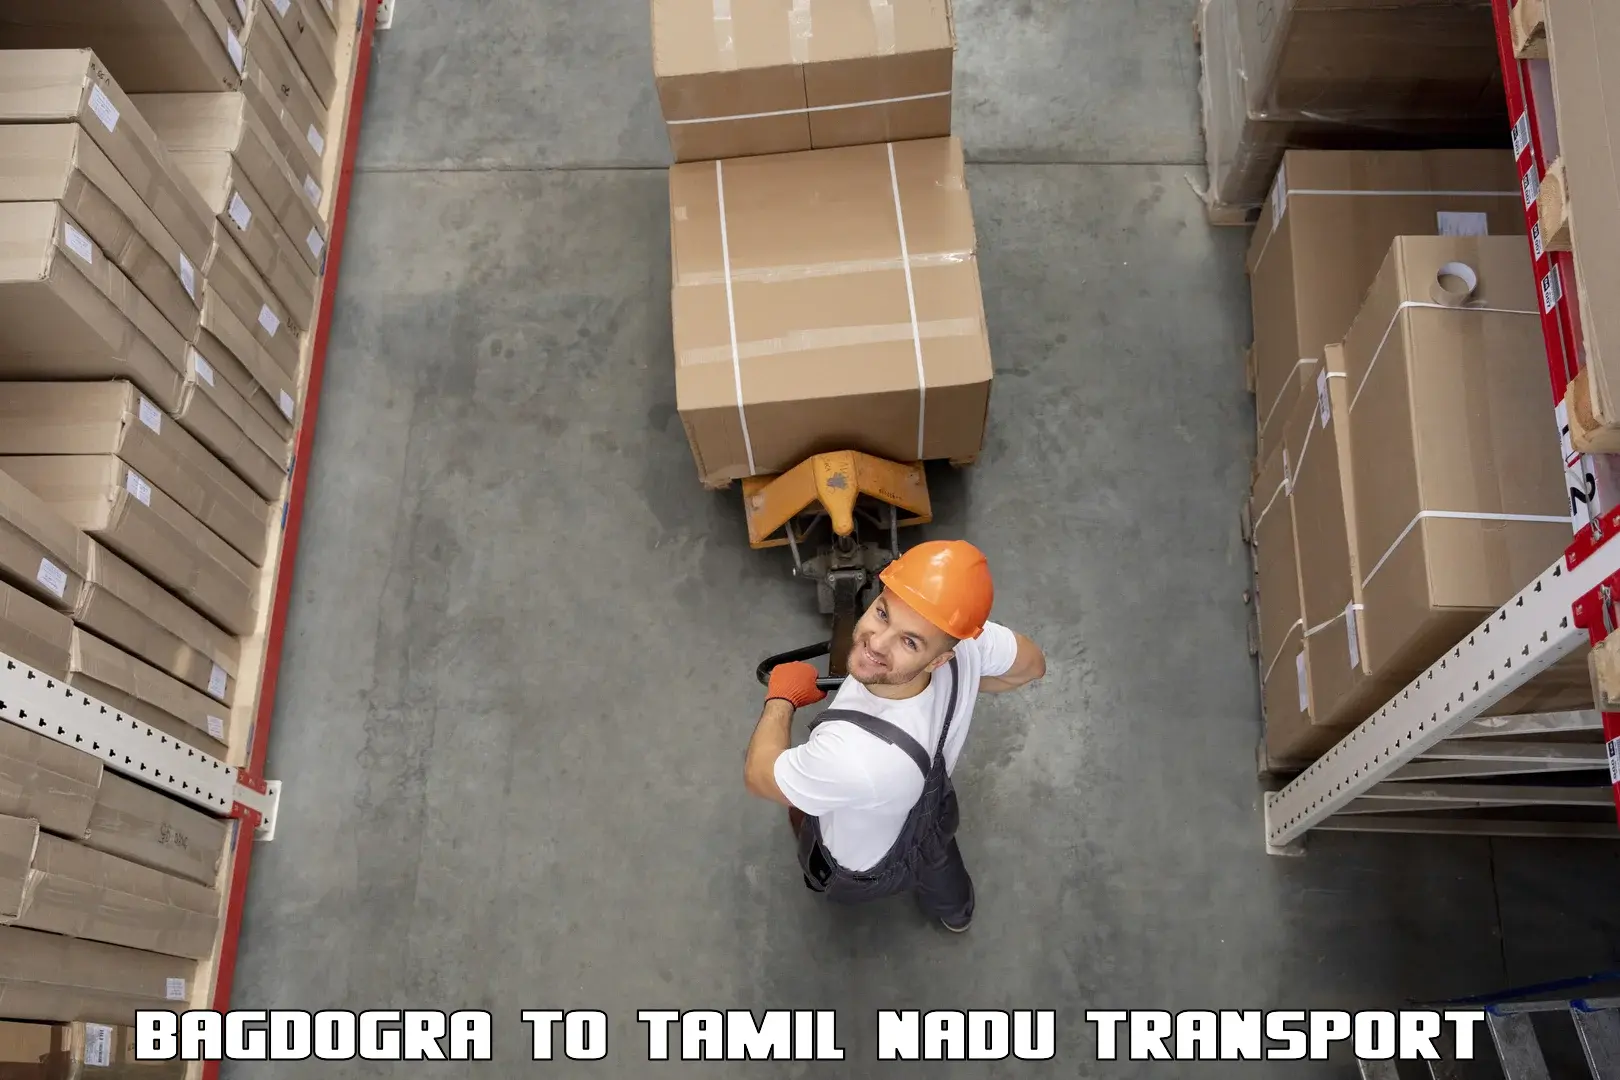 Nationwide transport services Bagdogra to Ennore Port Chennai